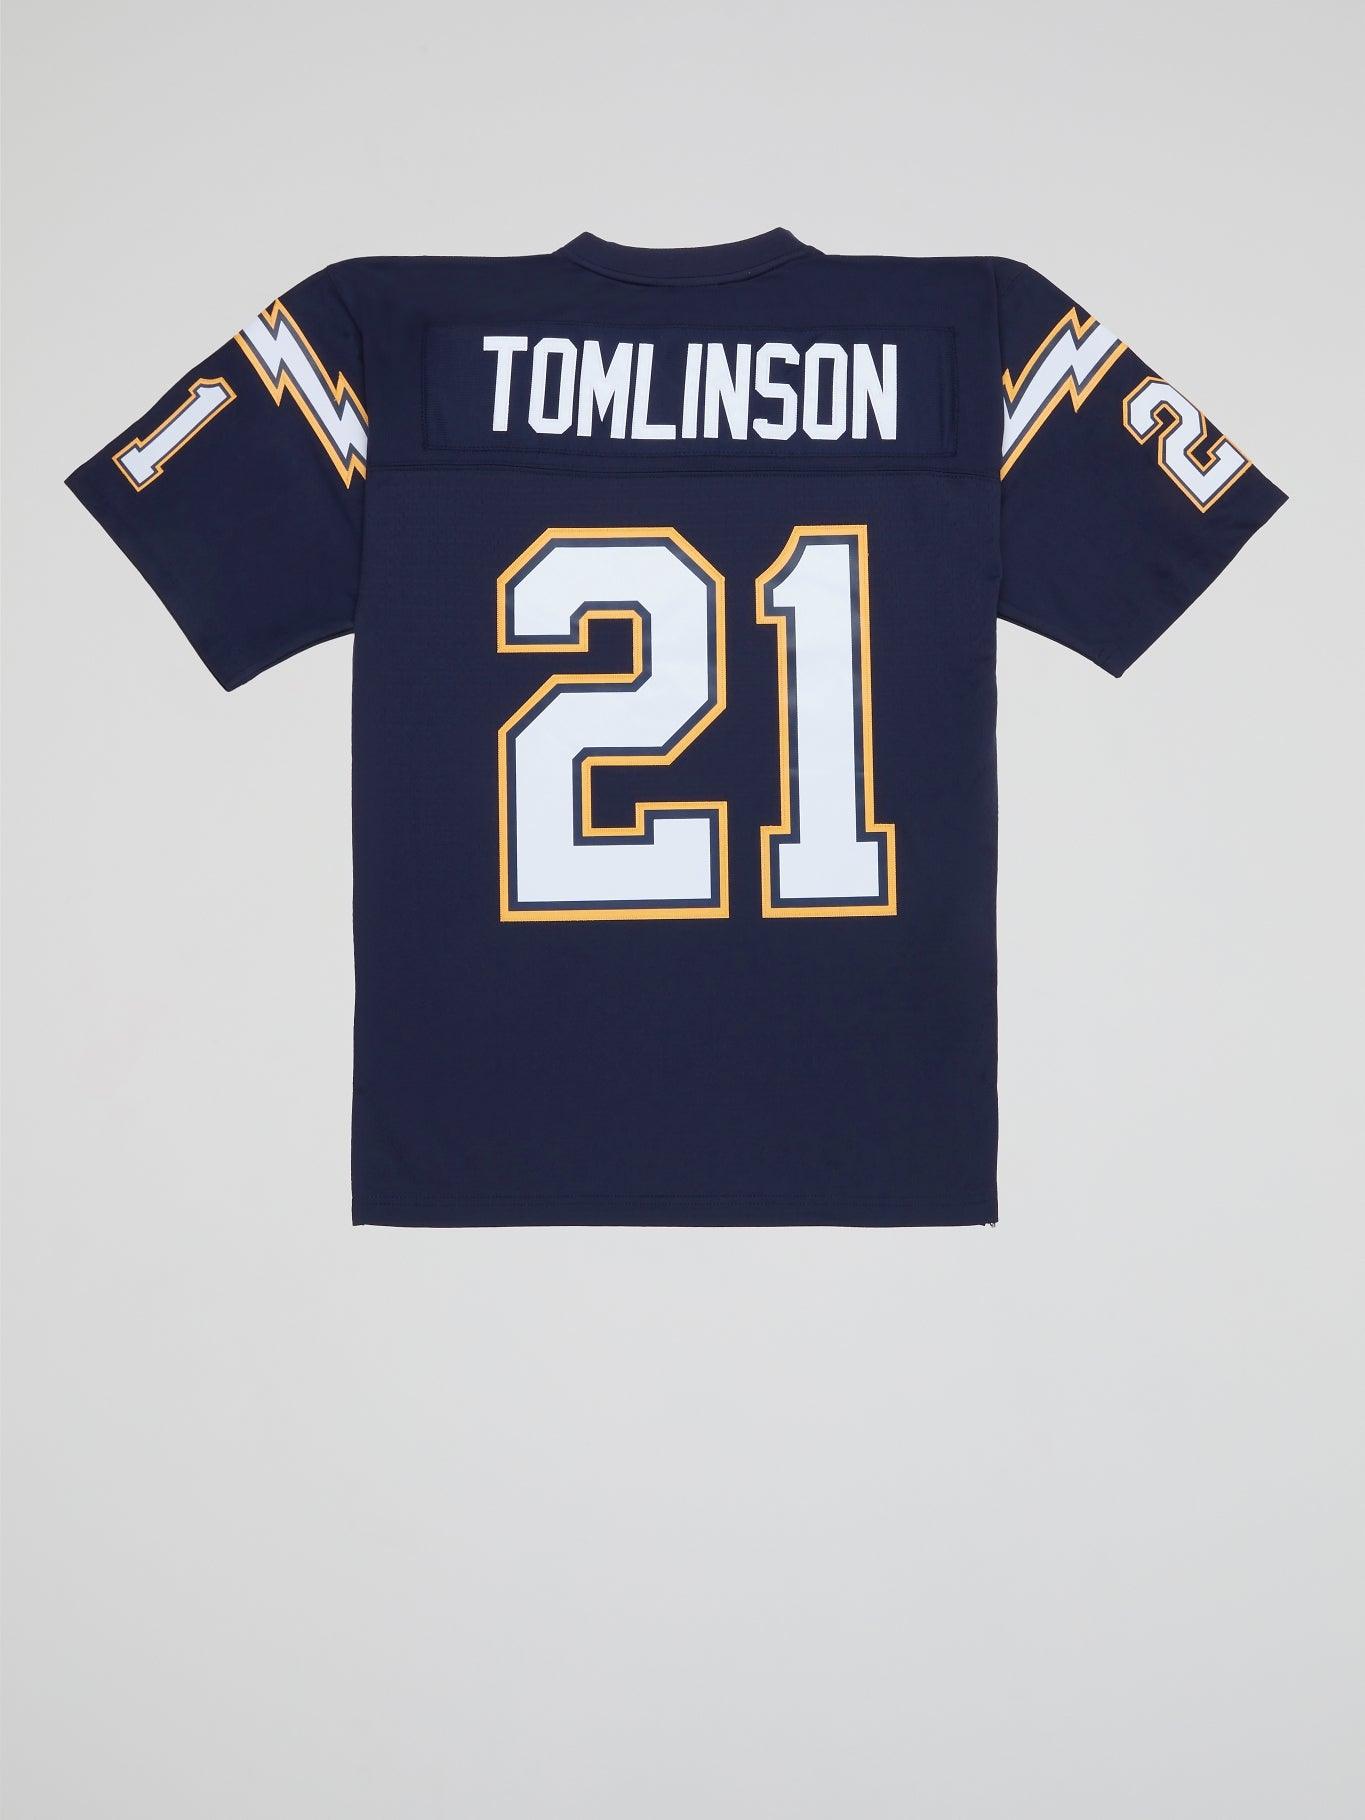 NFL Legacy Jersey Chargers 06 Ladainian Tomlinson - B-Hype Society